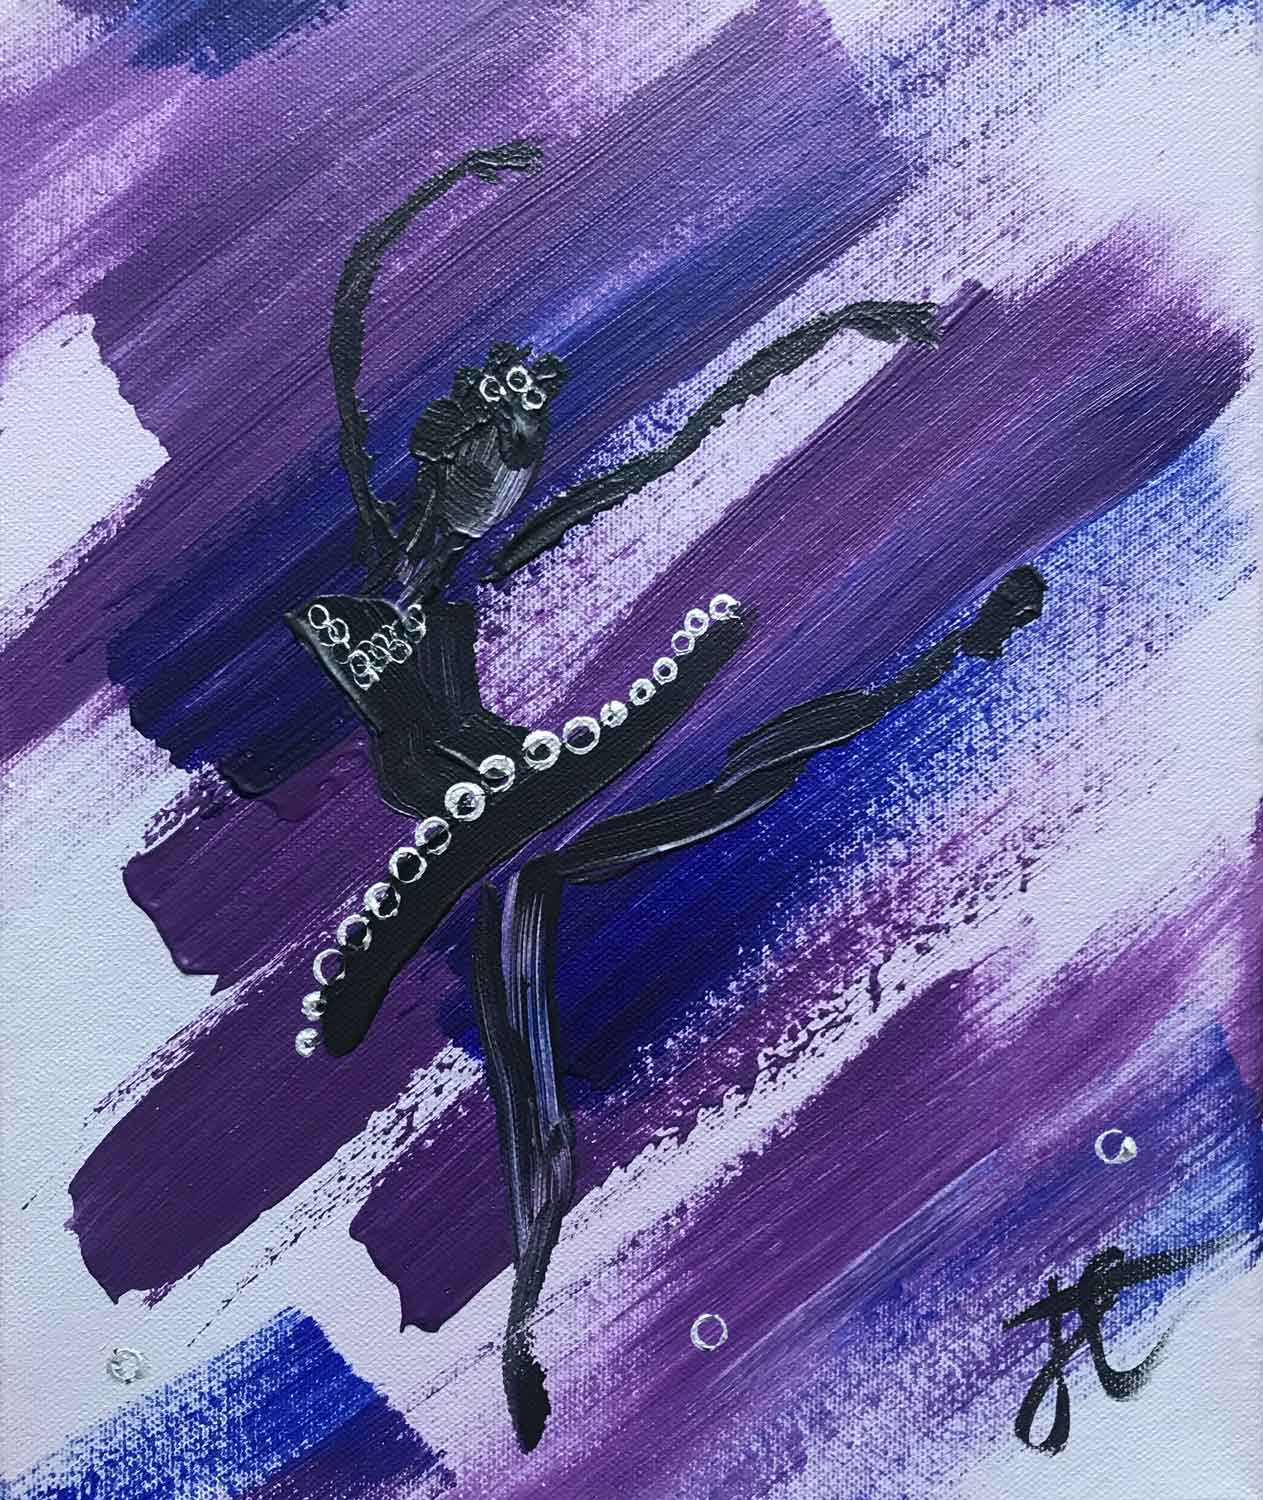 Painting shown cropped to edge: a grey background with bold purple and blue brushstrokes at diagonals. Superimposed on these is the silhouette of a ballerina in black. Silver circles add detail to her headpiece, bodice and the tutu edge. There are a few more circles in the foreground.